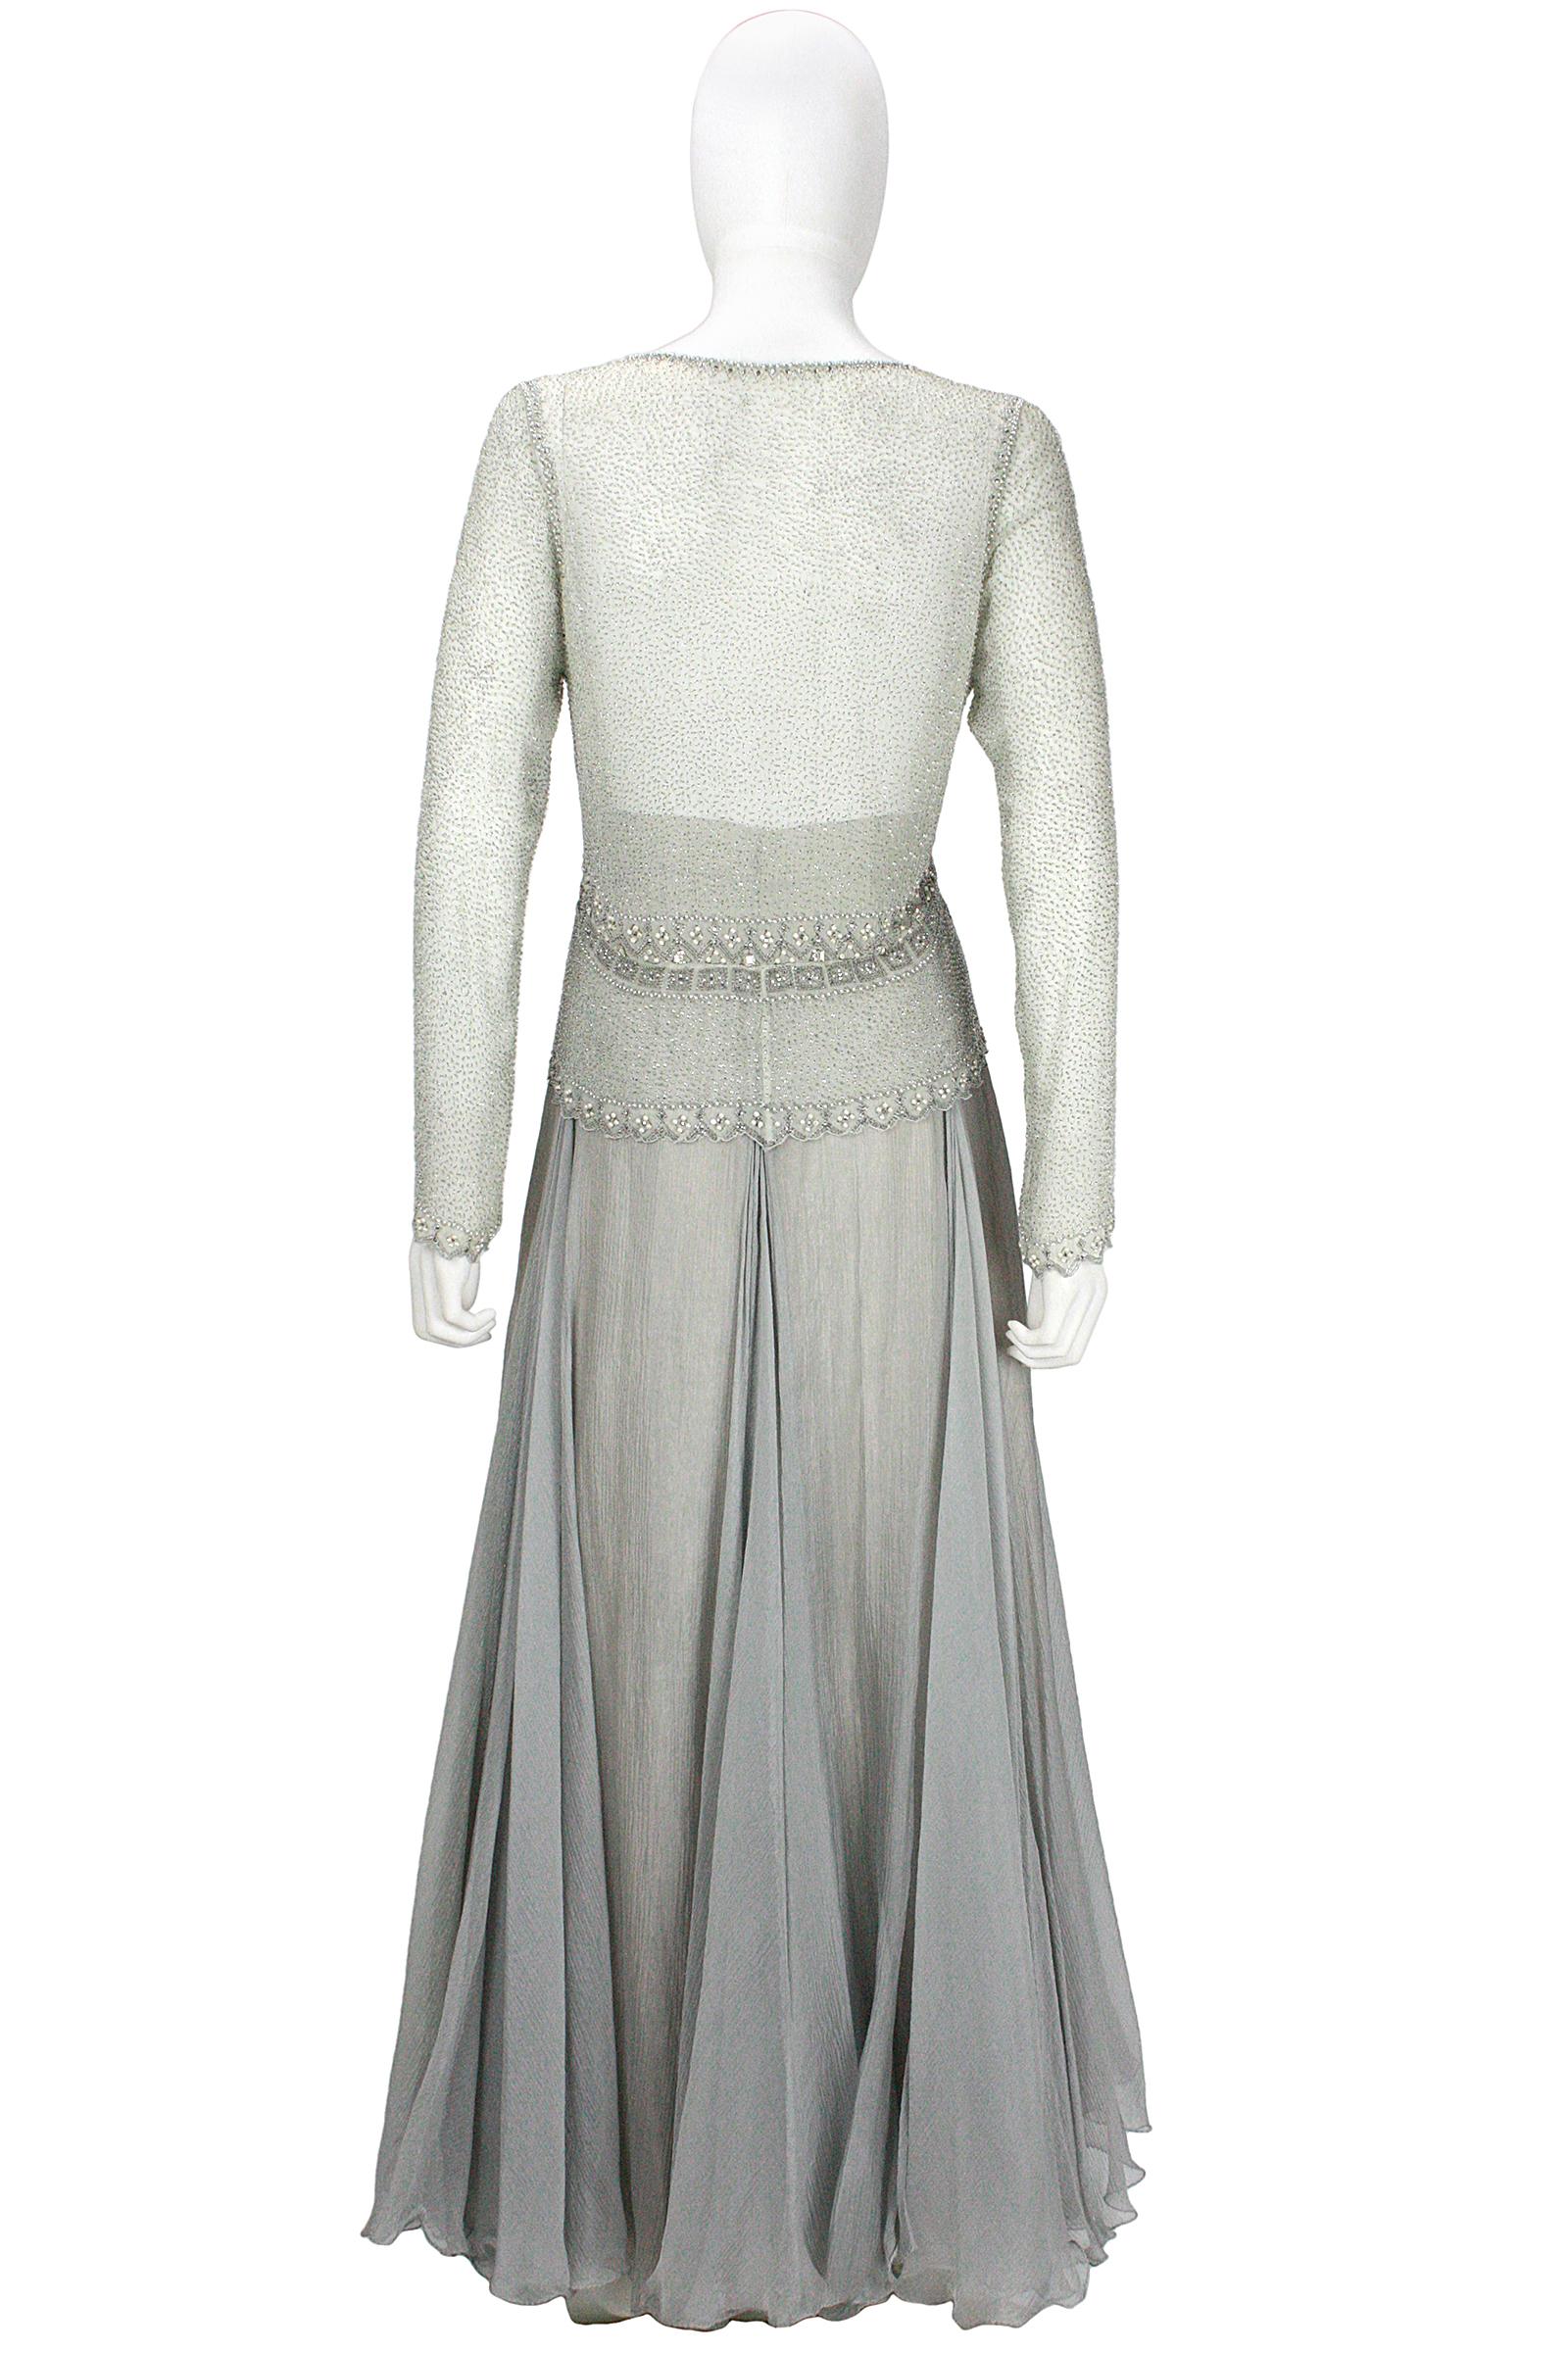 Eavis & Brown London Seafoam Chiffon Beaded Top and Long Silver Skirt  For Sale 2